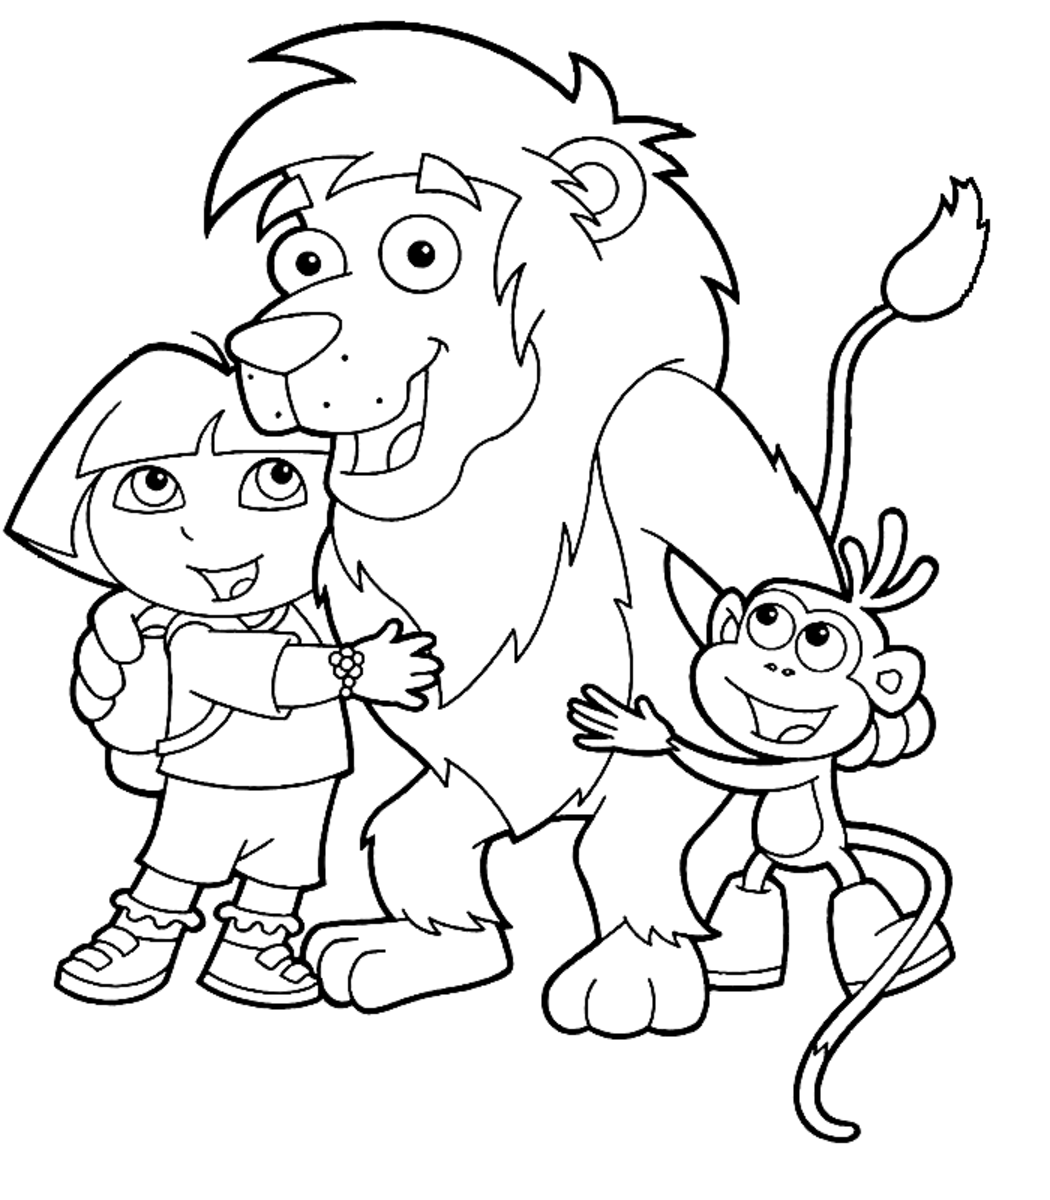 dora-the-explorer-printable-coloring-pages-hubpages